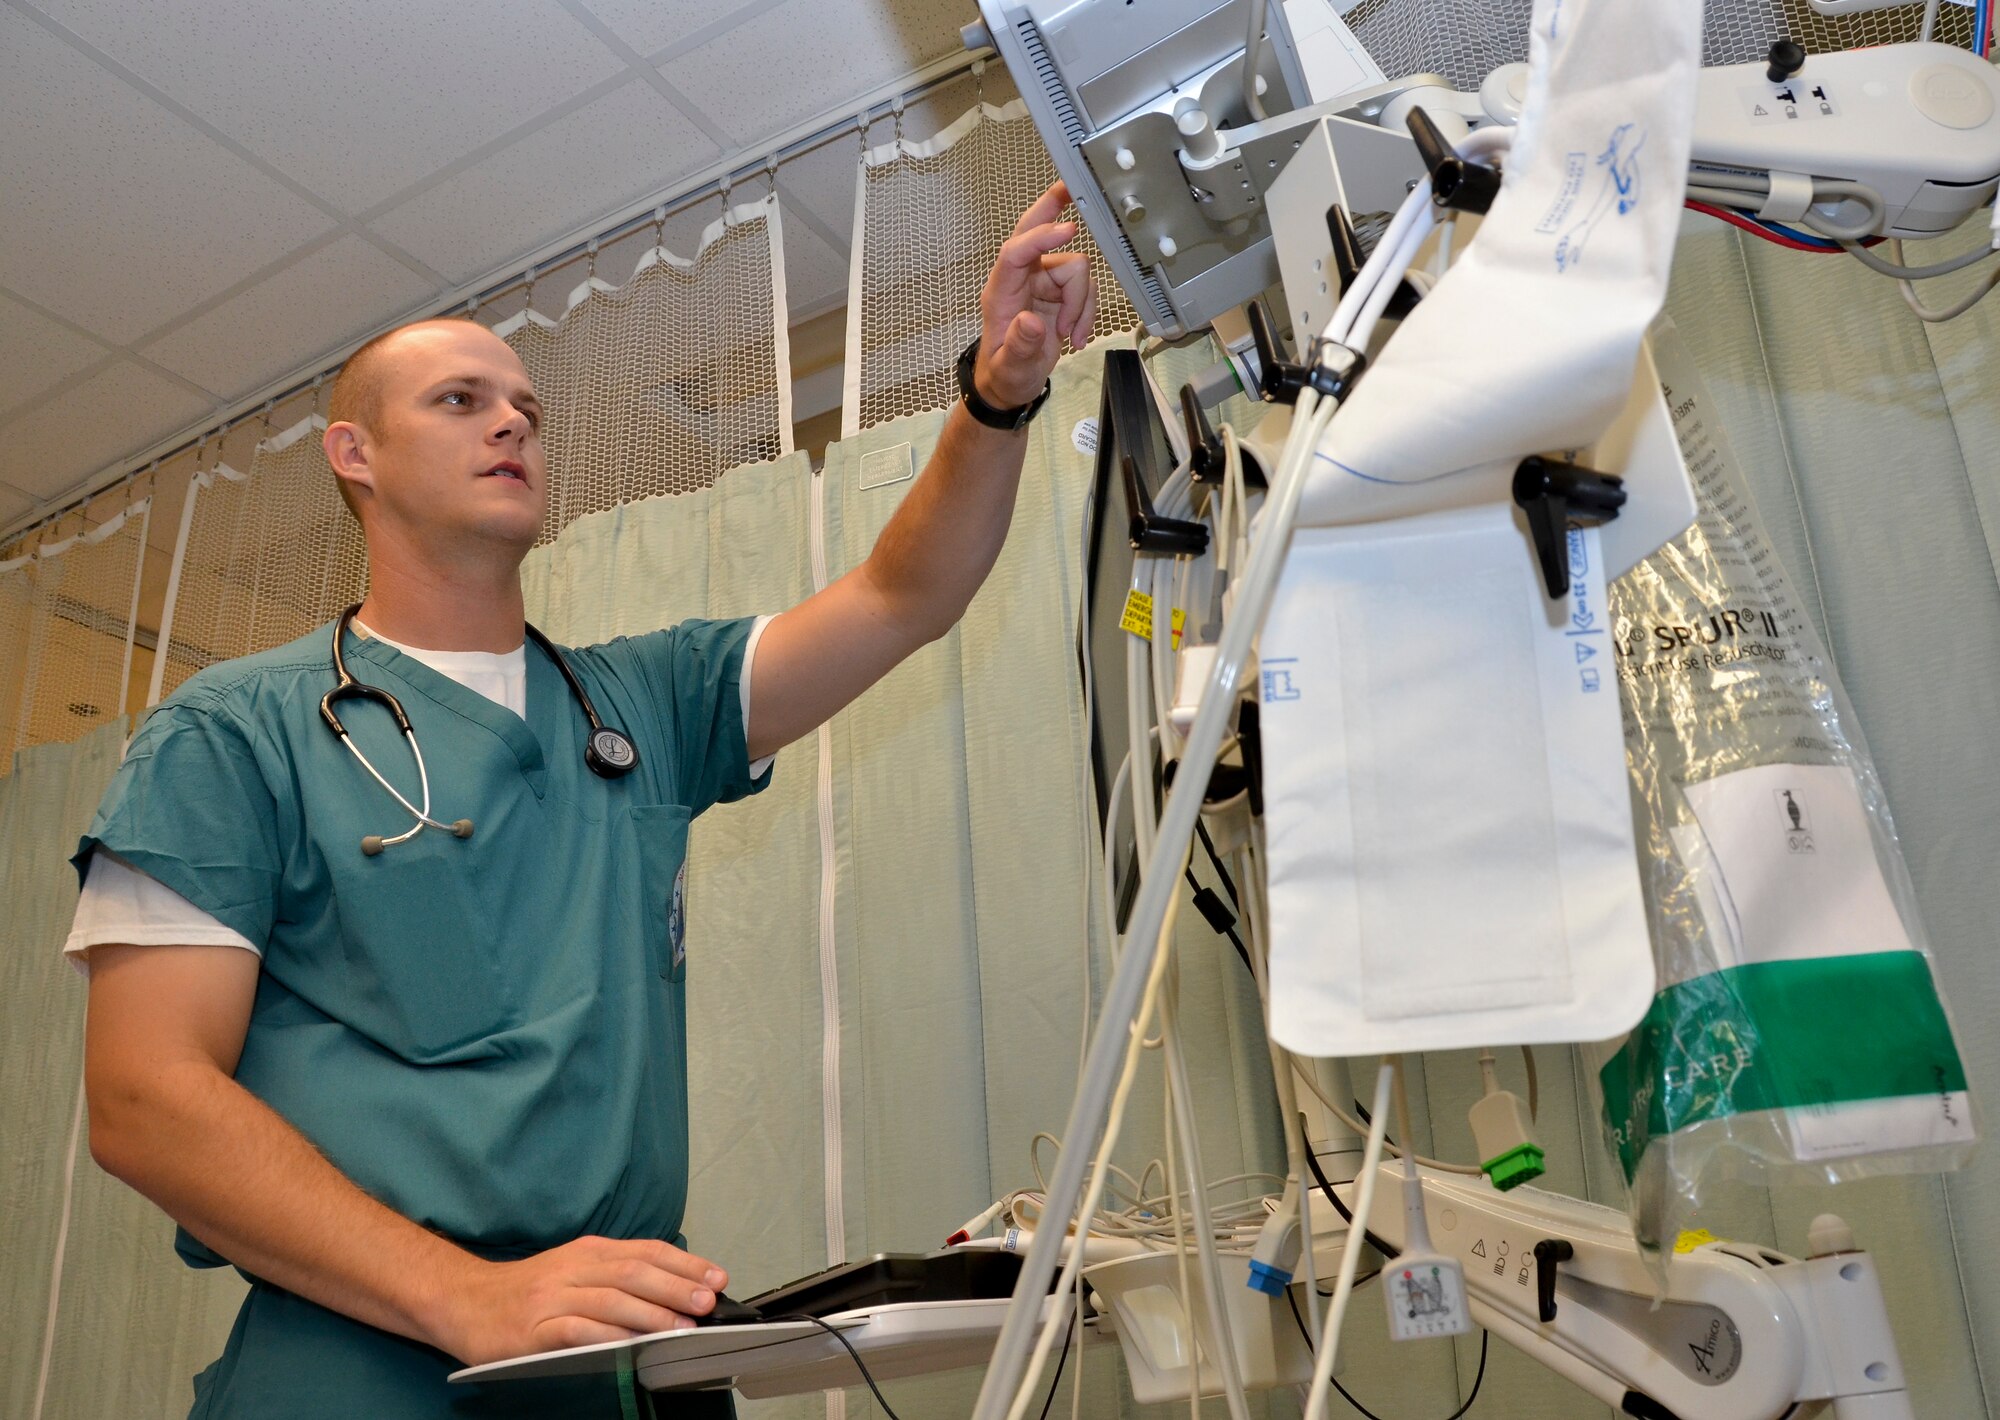 2nd Lt. Zachary Mabeus, nurse, 117th Medical Group, prepares a room for a patient at Naval Medical Center San Diego, in San Diego, Calif., June 29, 2016.  The 117 MDG trained with the U.S. Navy at Naval Medical Center San Diego.  The training included Airmen being implemented in real world U.S. Naval operations.  (U.S. Air National Guard photo by Staff Sgt. Jeremy Farson/Released)   